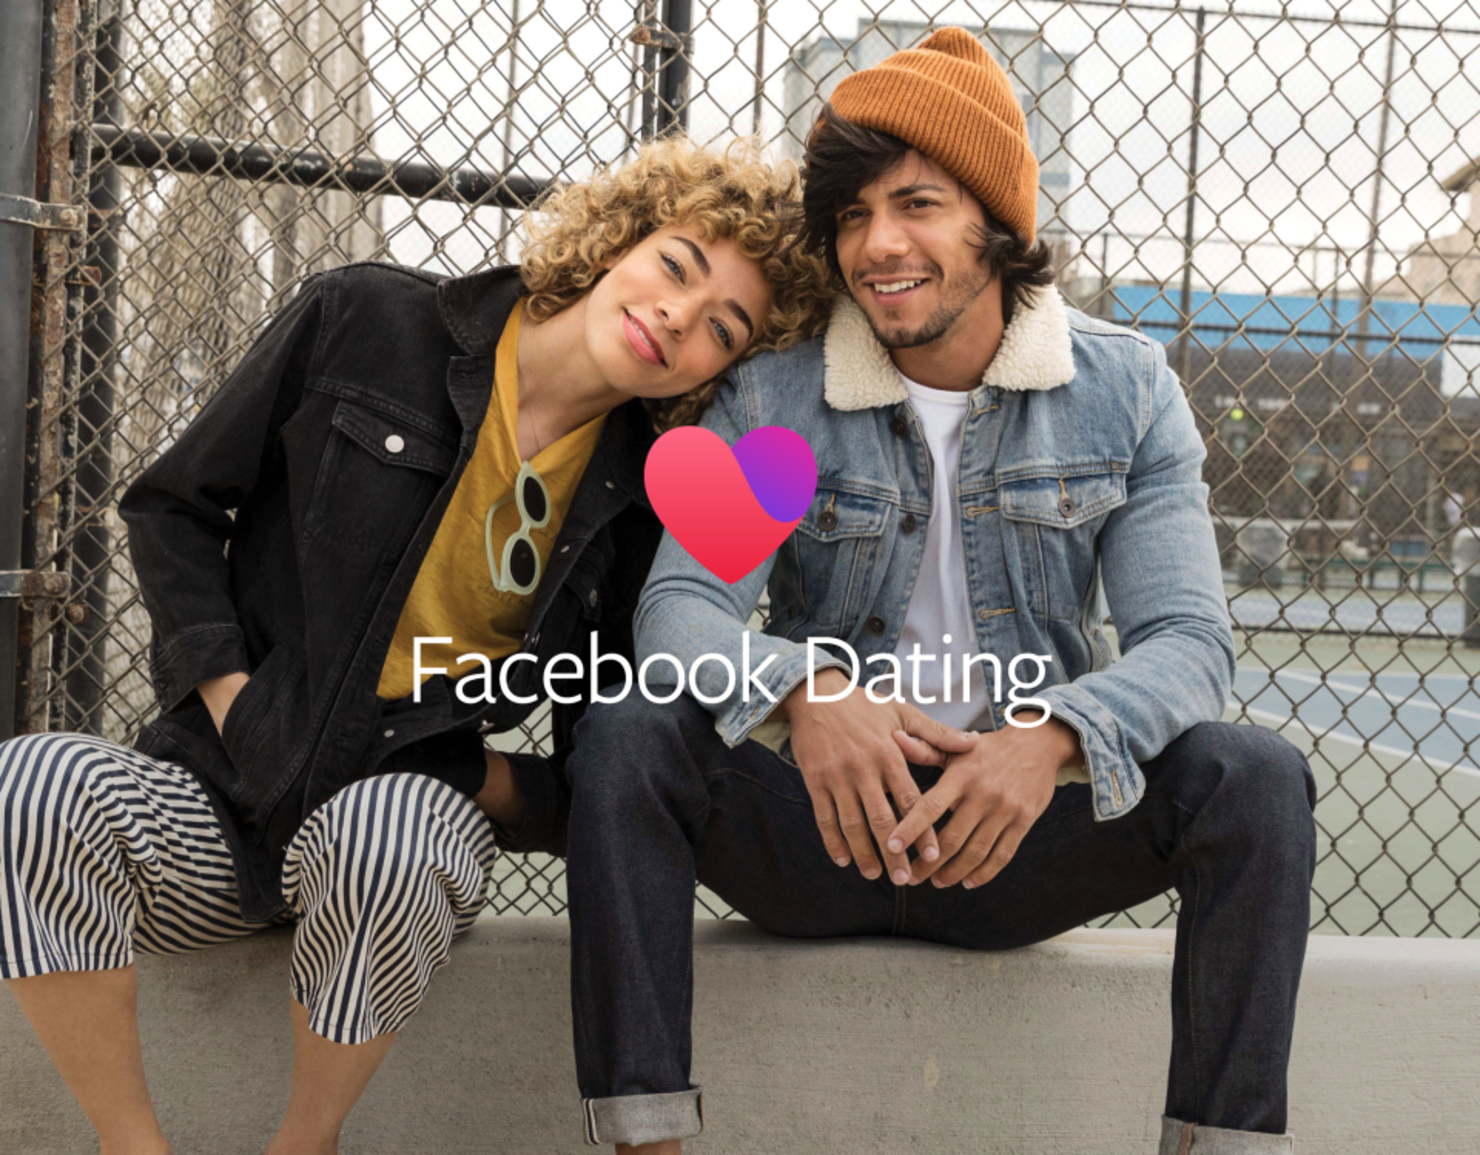 Facebook launches dating service in US